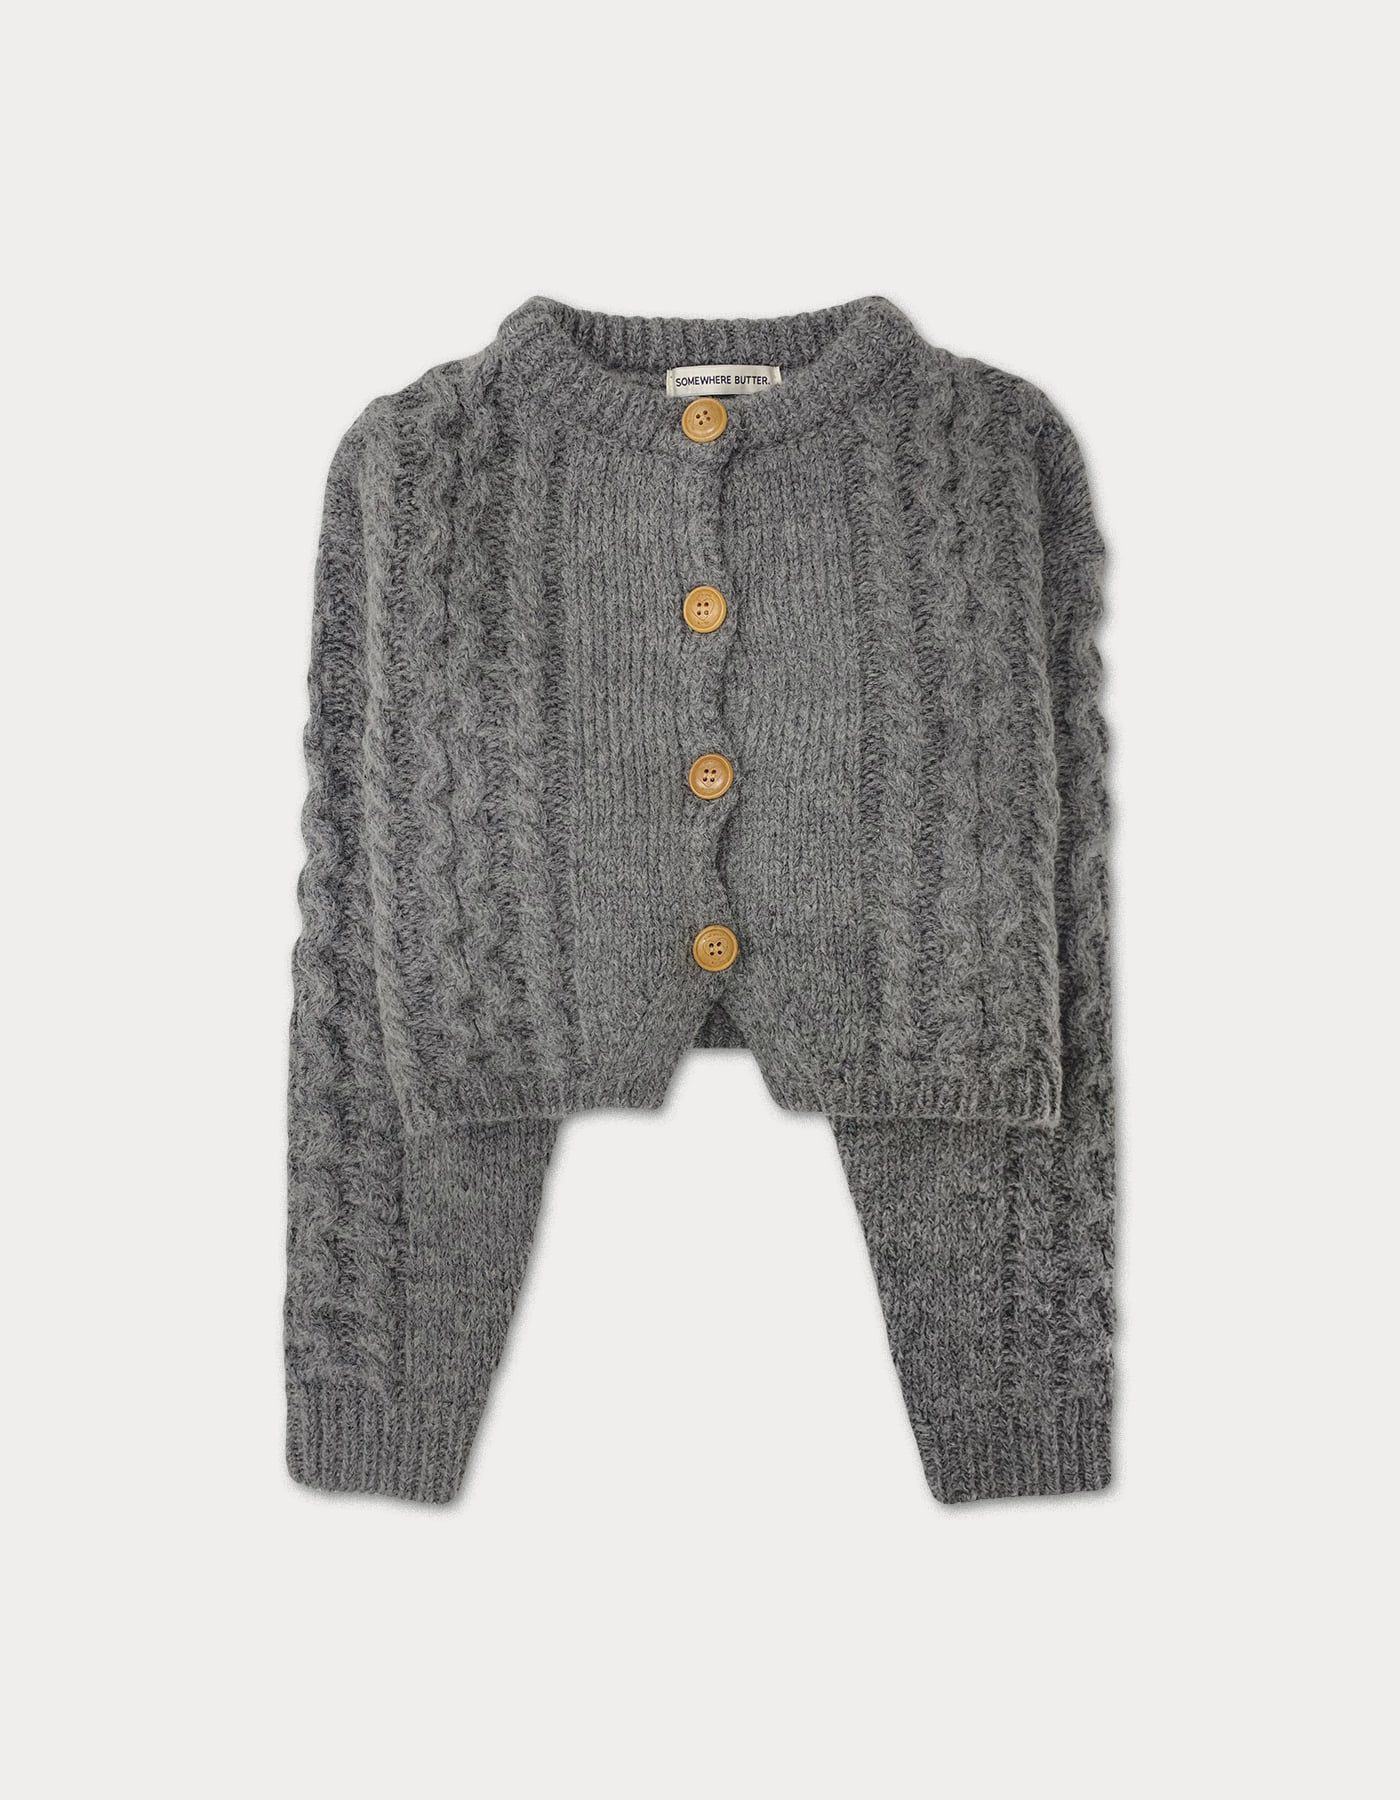 Woodbutton cable cardigan - charcoal